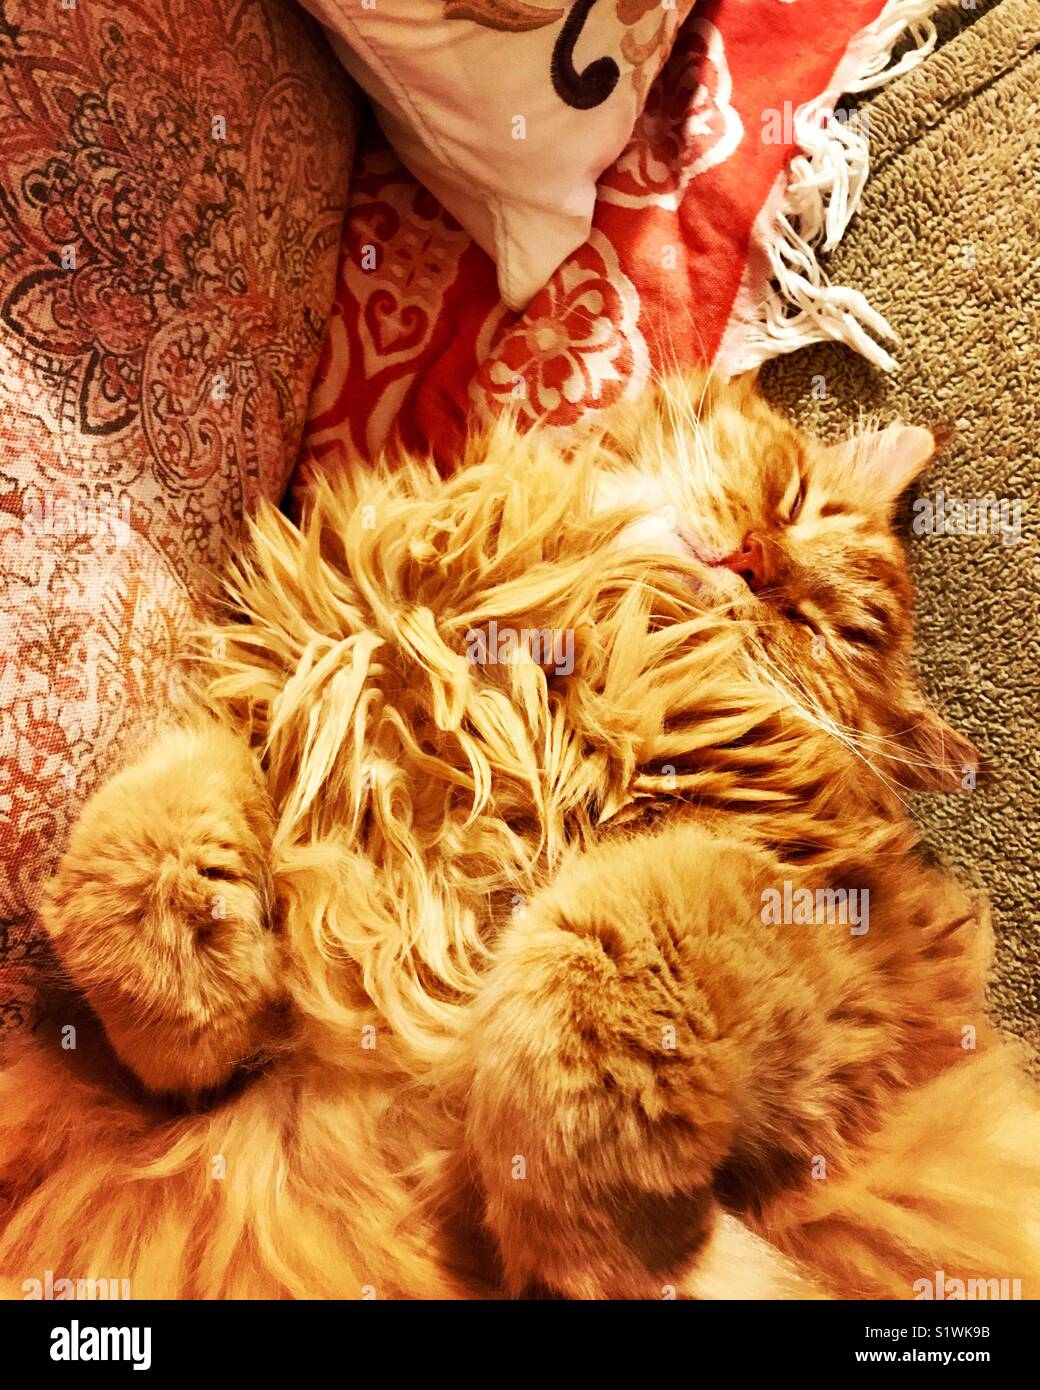 Baby Leo, our giant furry ginger cat, sleeping on blankets and pillows. Stock Photo